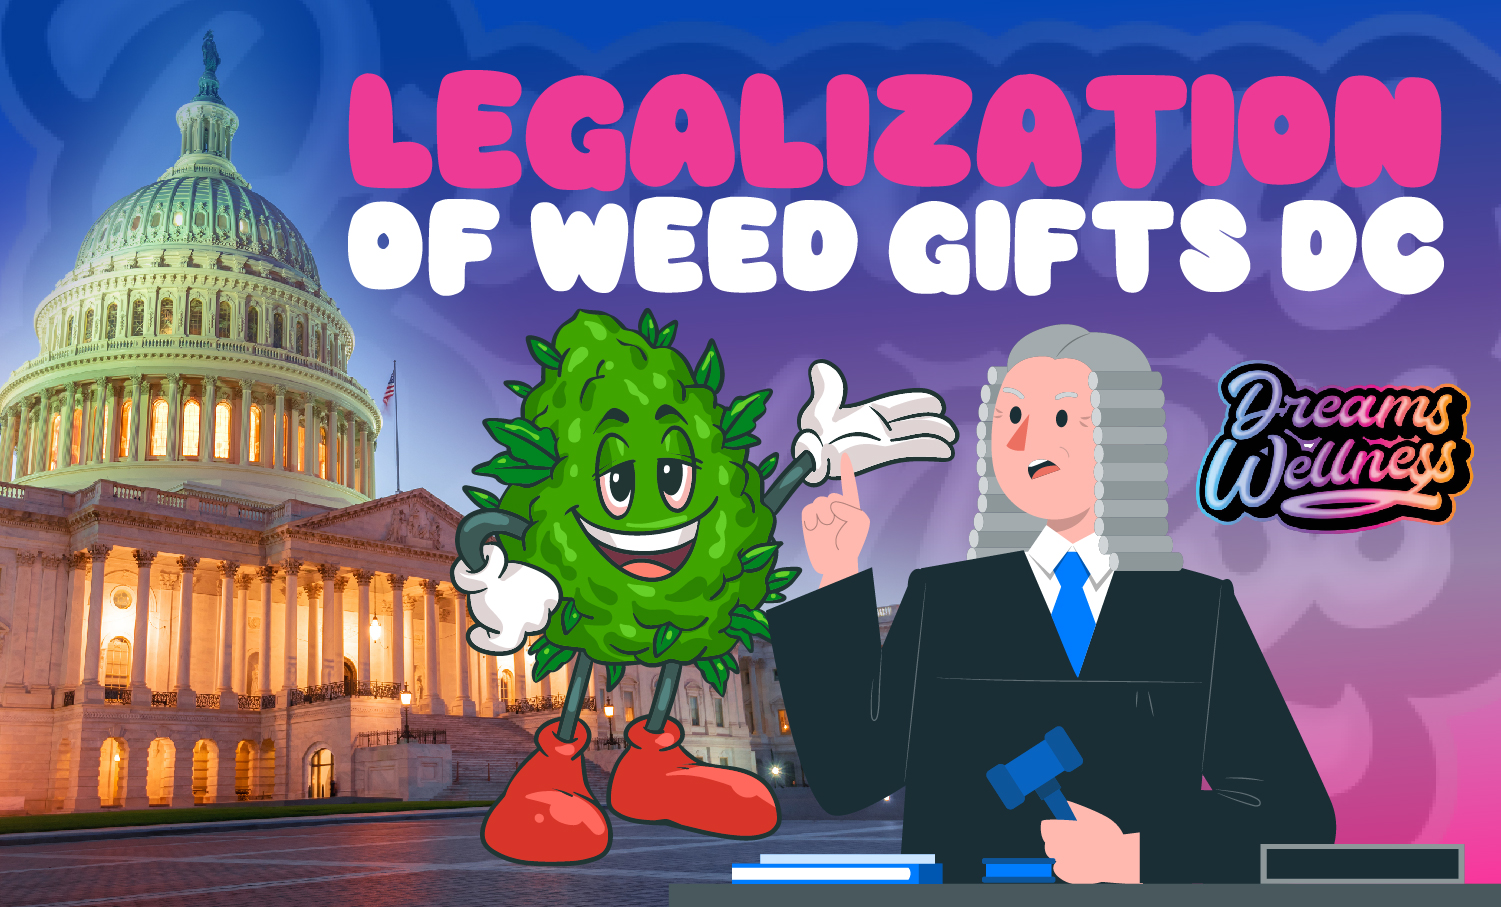 legalization of weed gifts dc